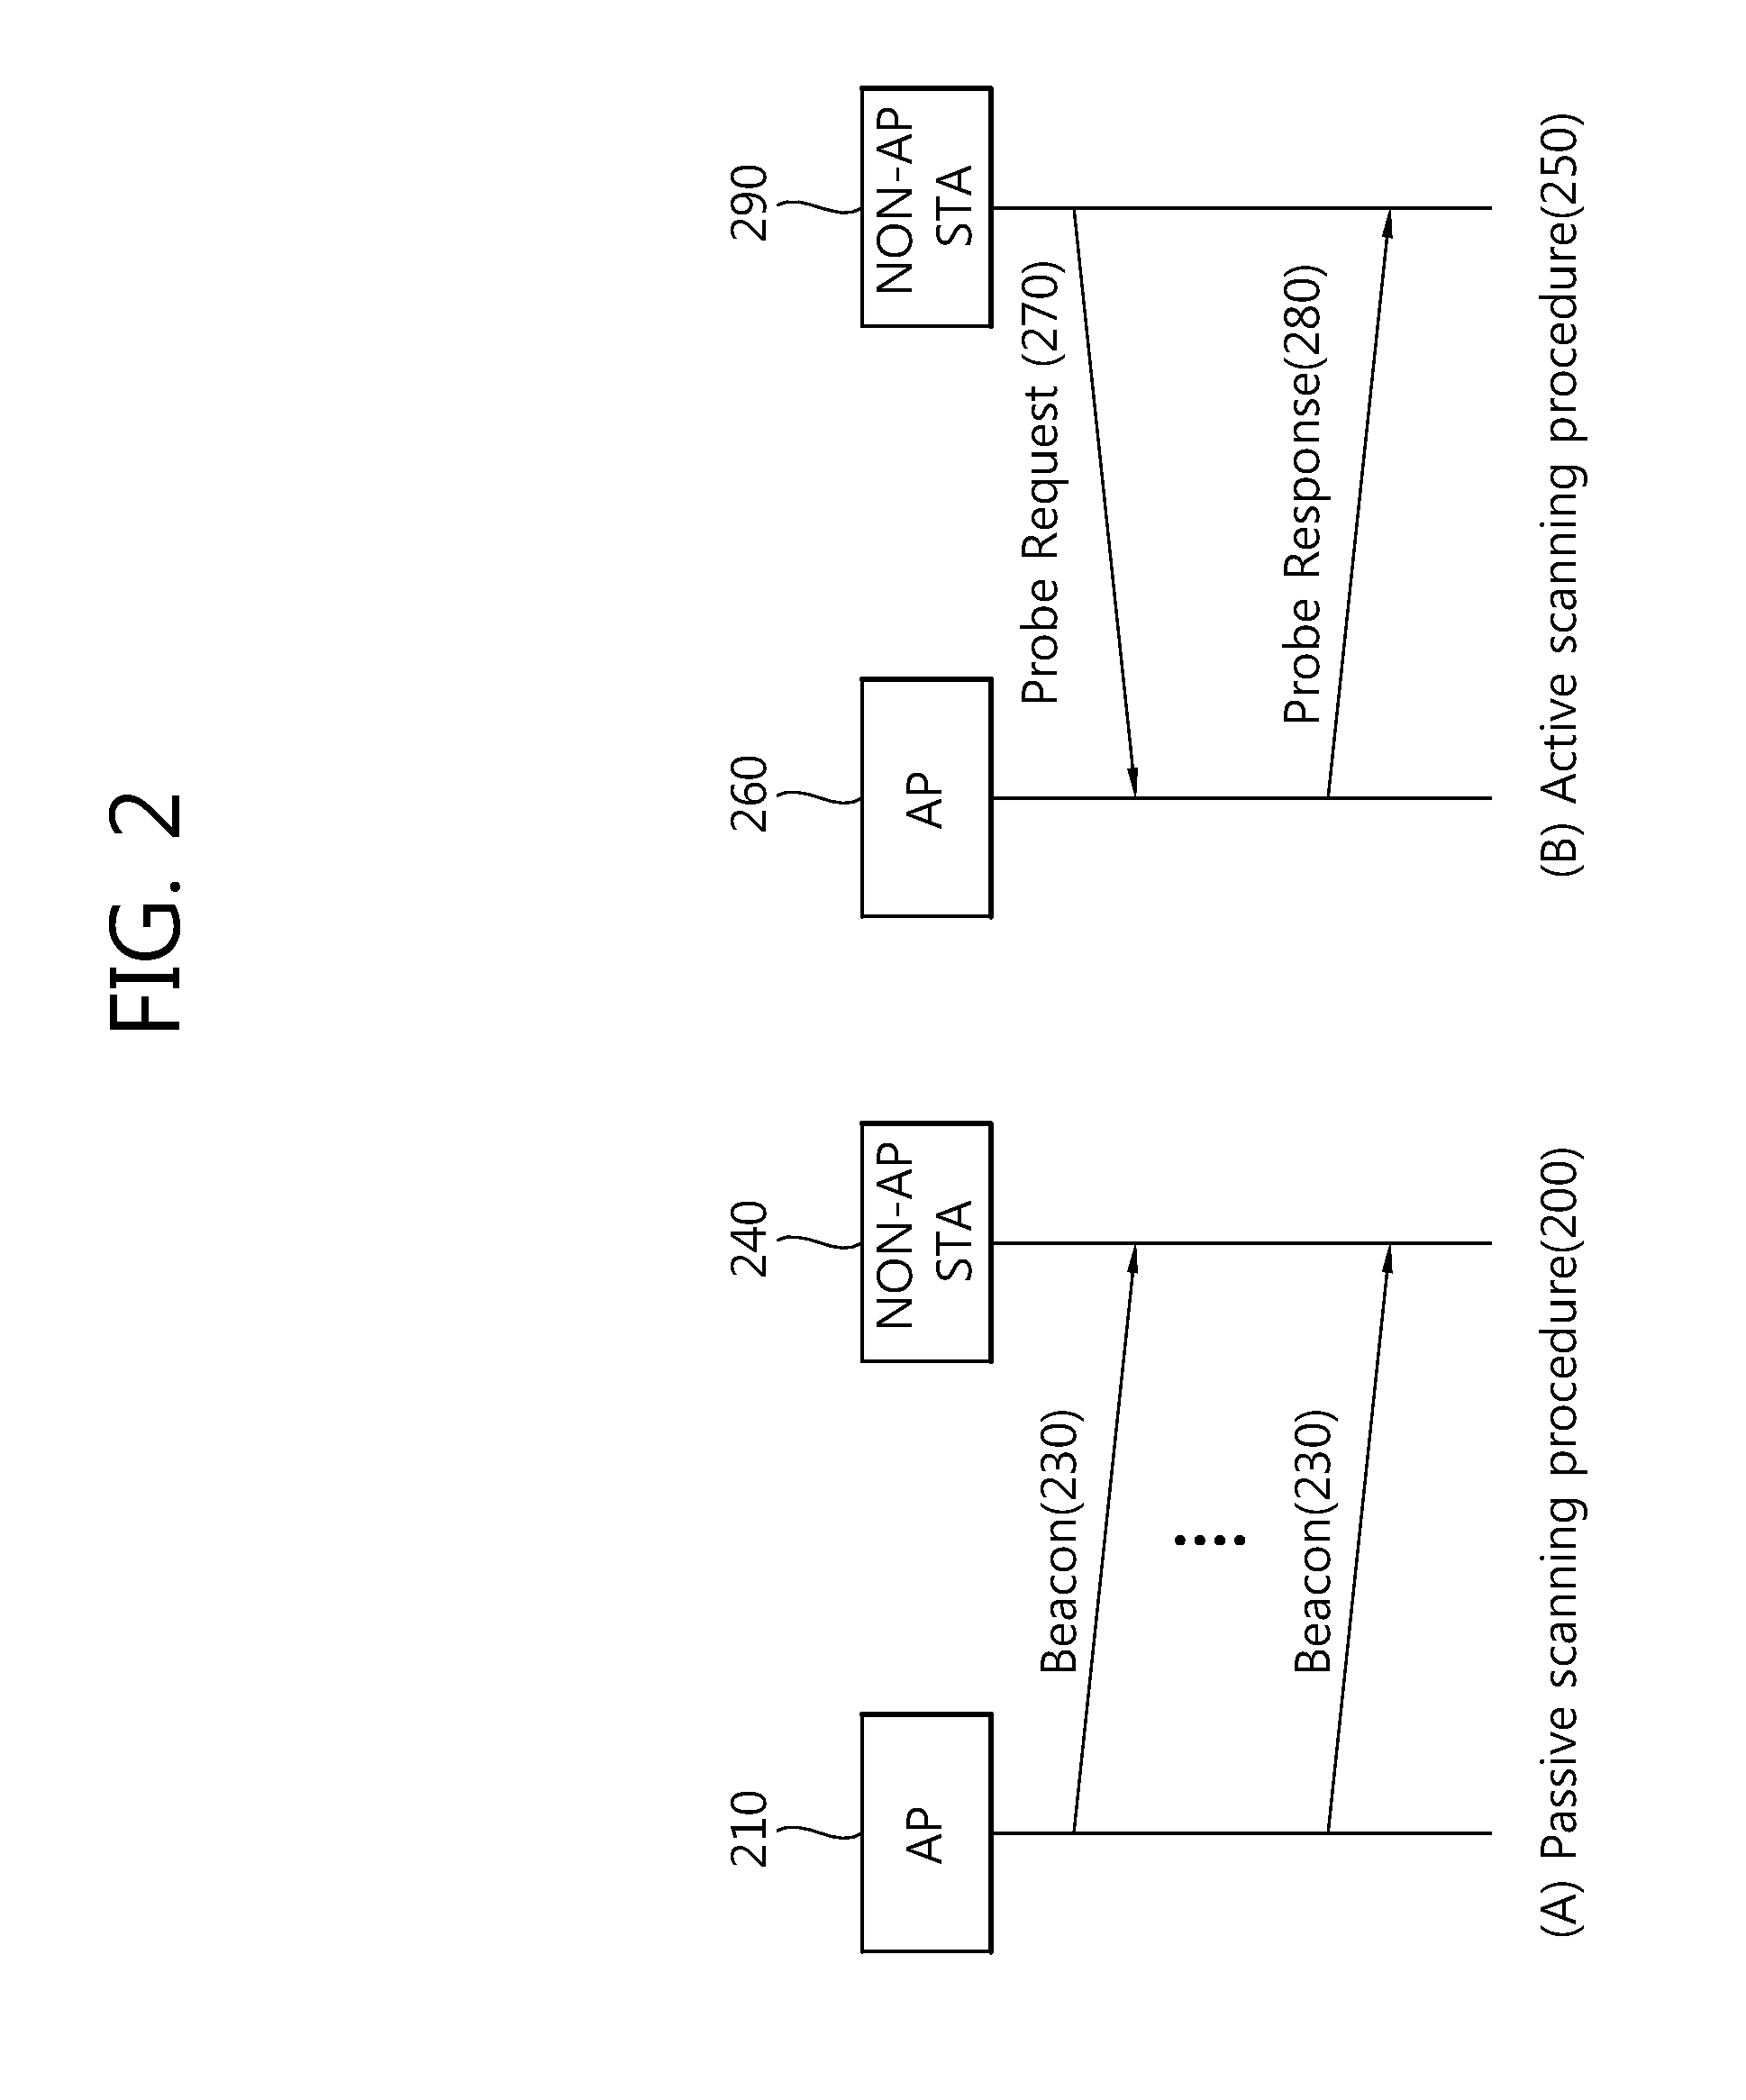 Link adaptation and device in active scanning method